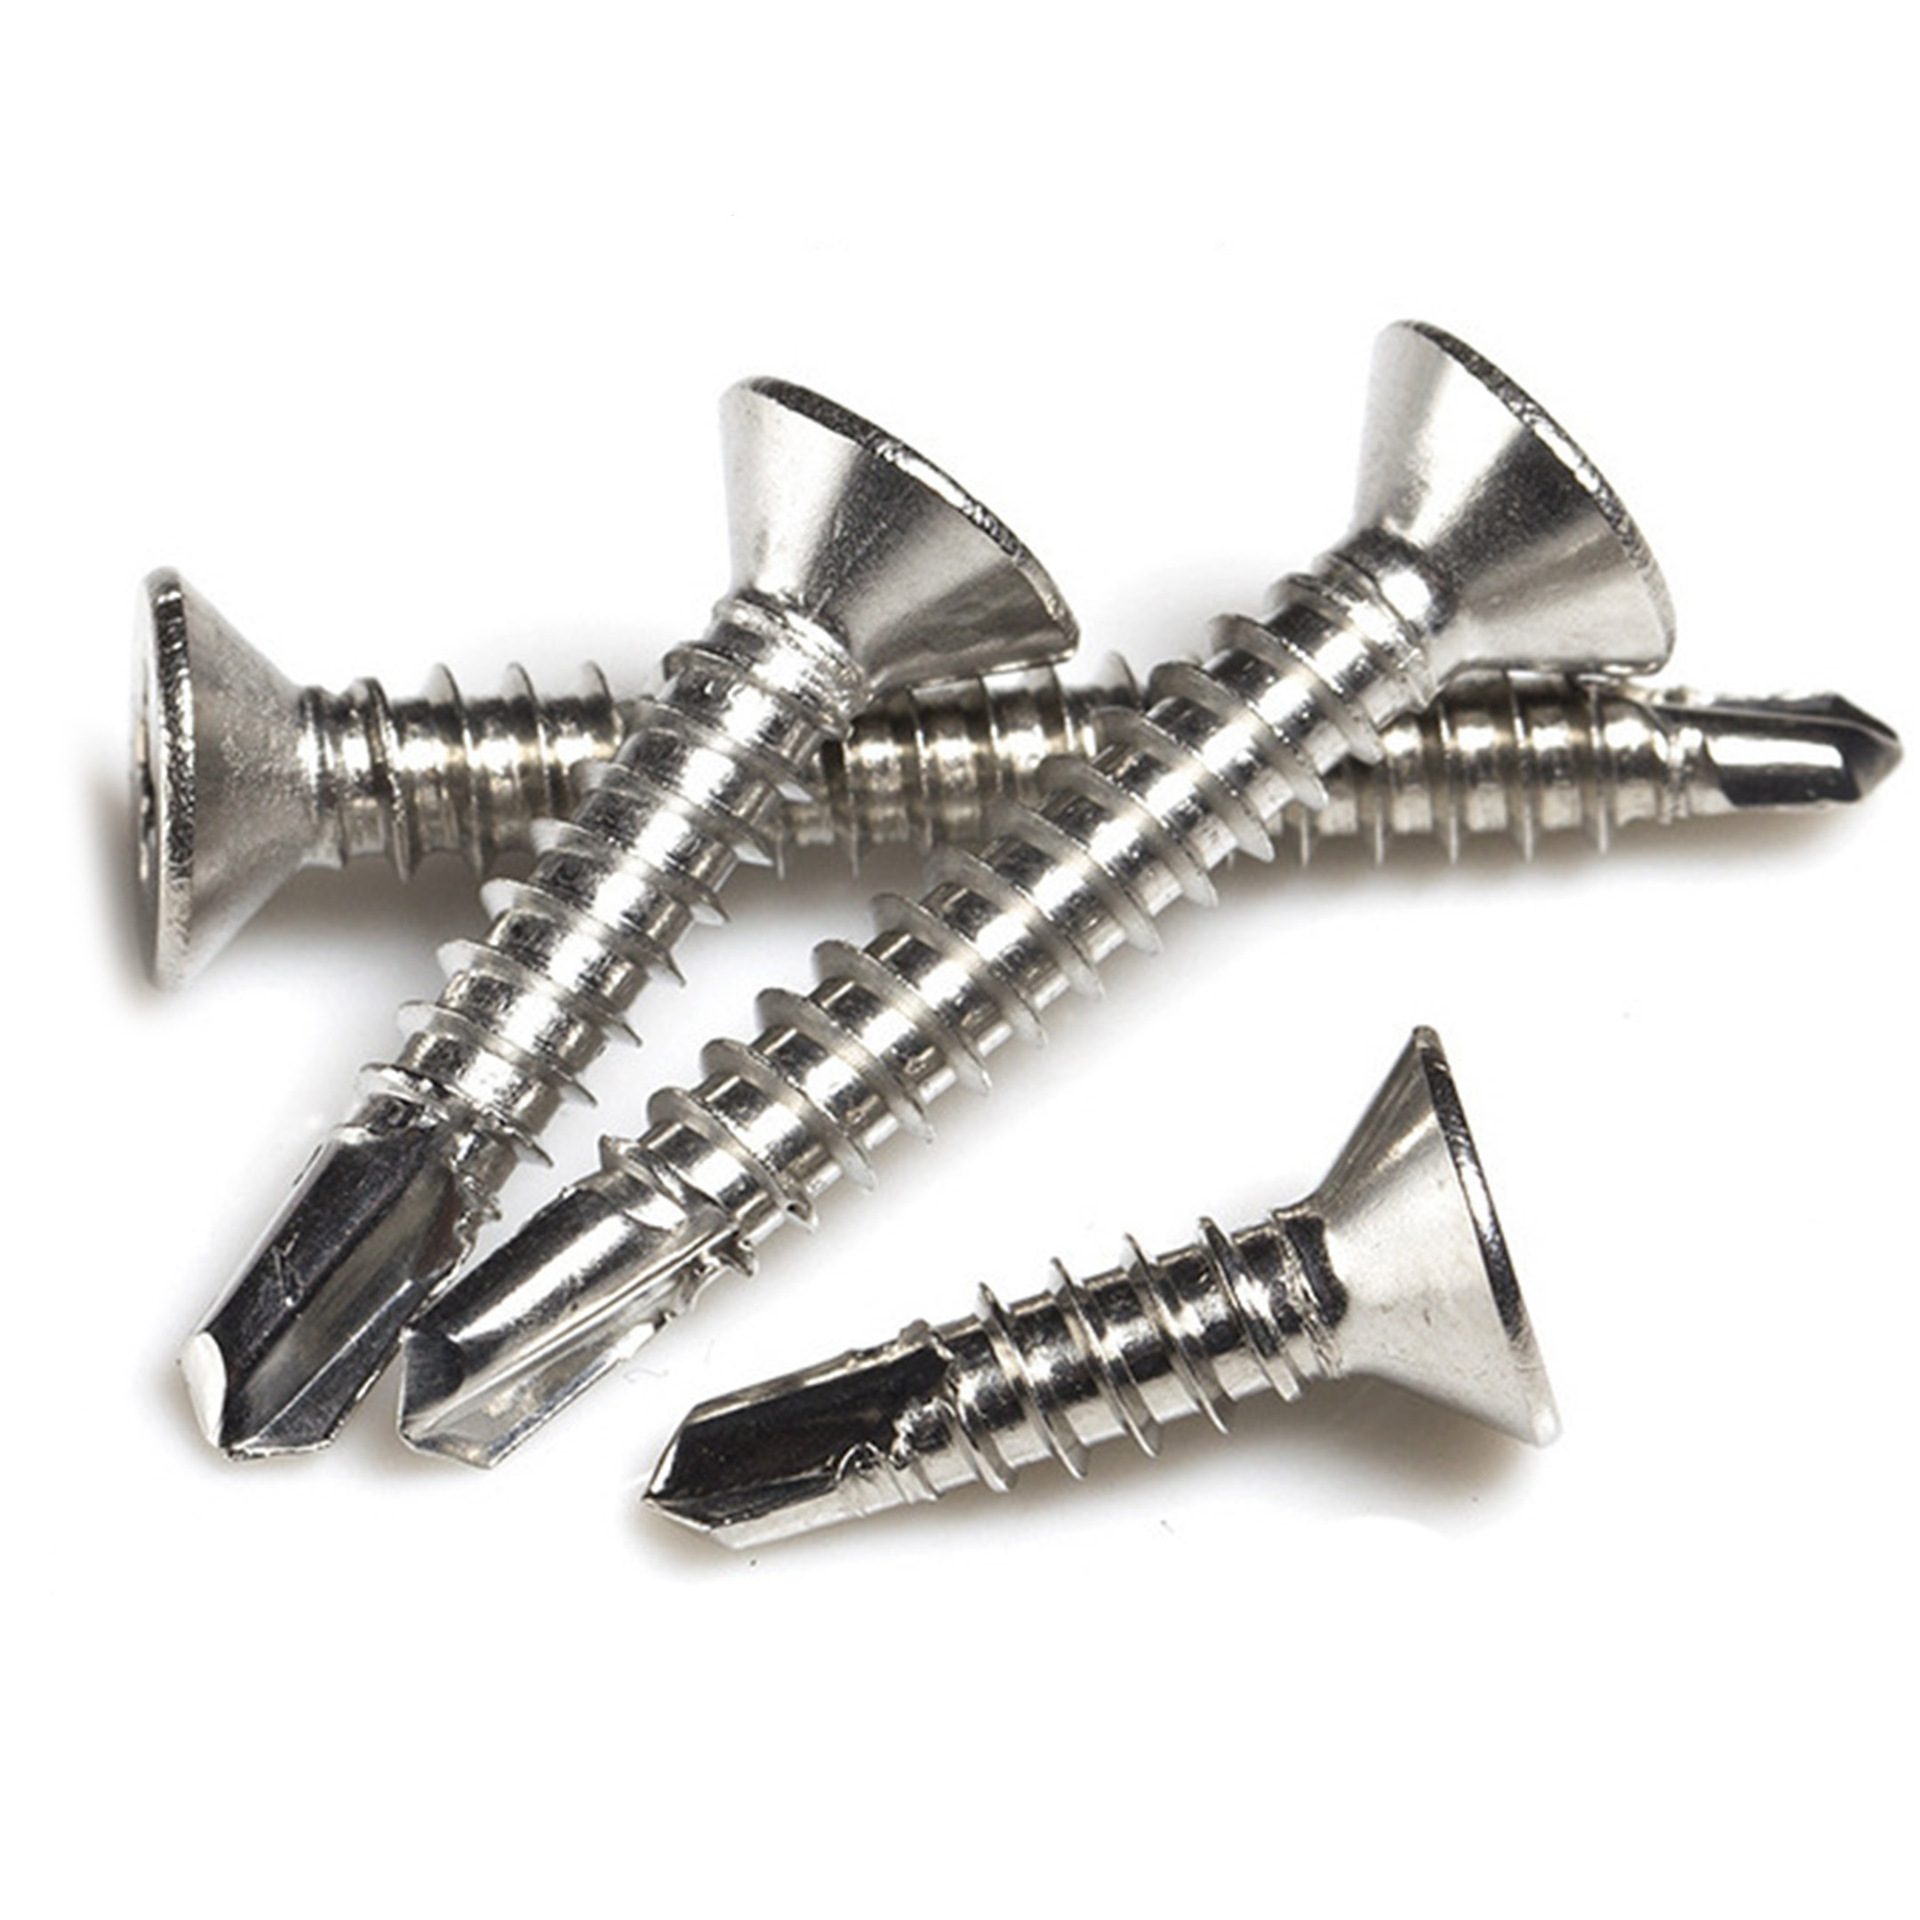 M3.9 304 Stainless Steel Phillips Flat Head Drilling Self-Tapping Screws